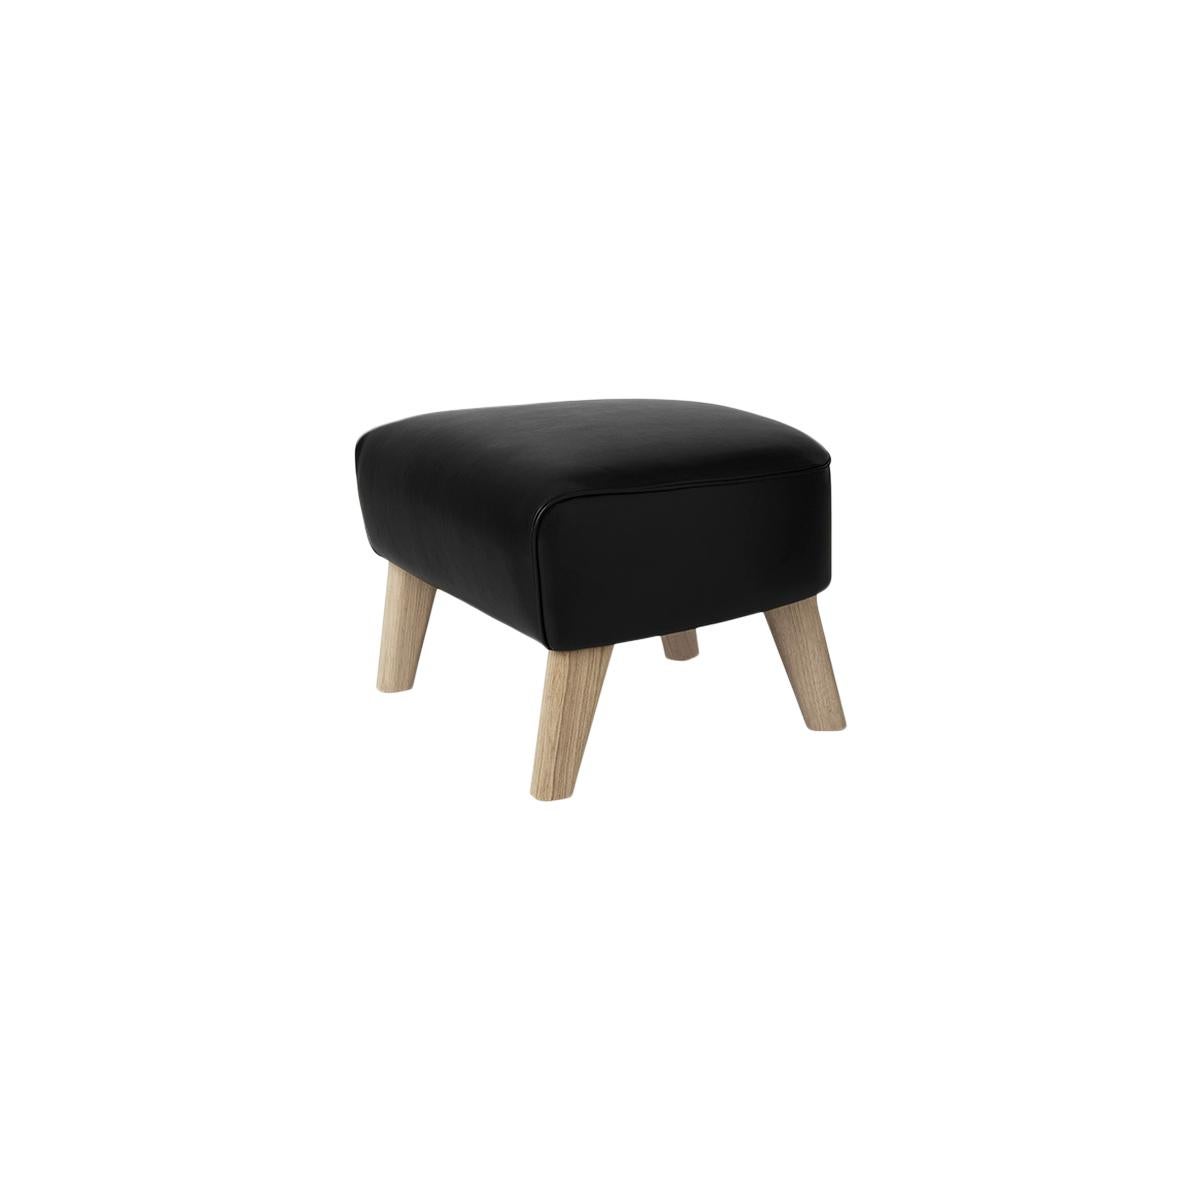 Modern Set of 4 Black Leather and Natural Oak My Own Chair Footstools by Lassen